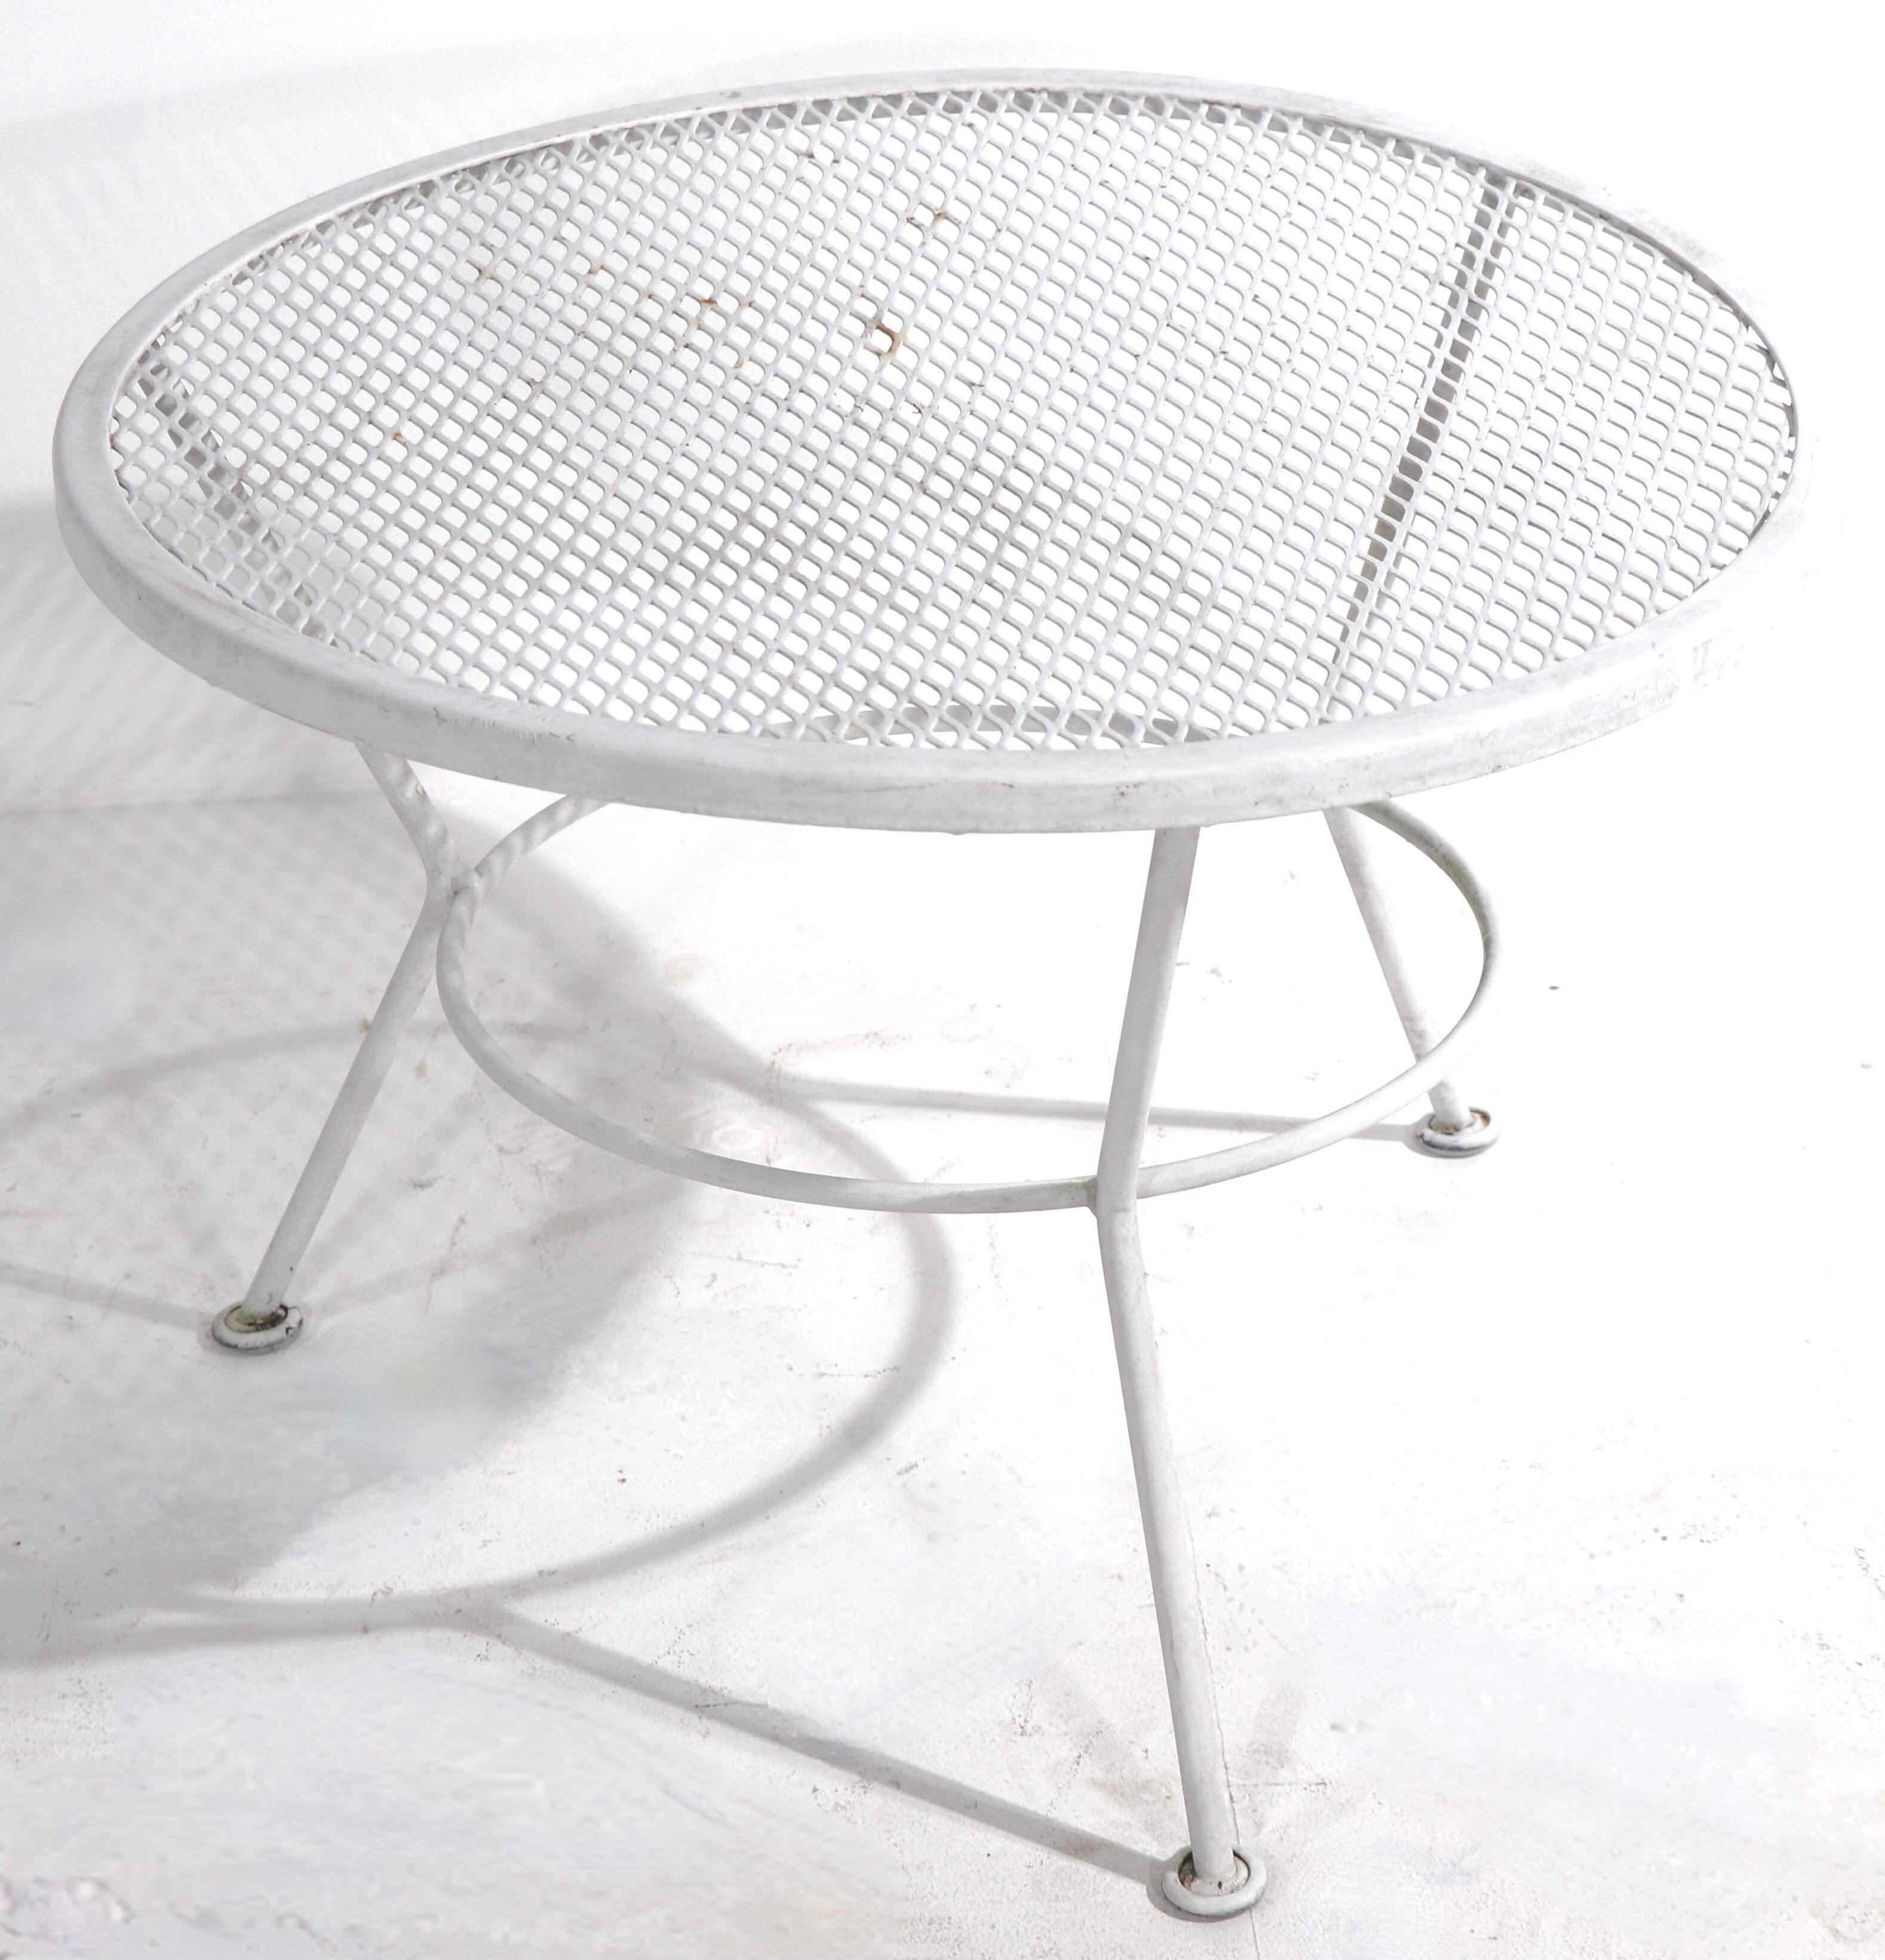 Architectural side, cocktail or end table with wrought iron base and metal mesh top. The table is currently in white paint finish, which shows cosmetic wear, normal and consistent with age. Usable as is or we offer custom powder coating if you